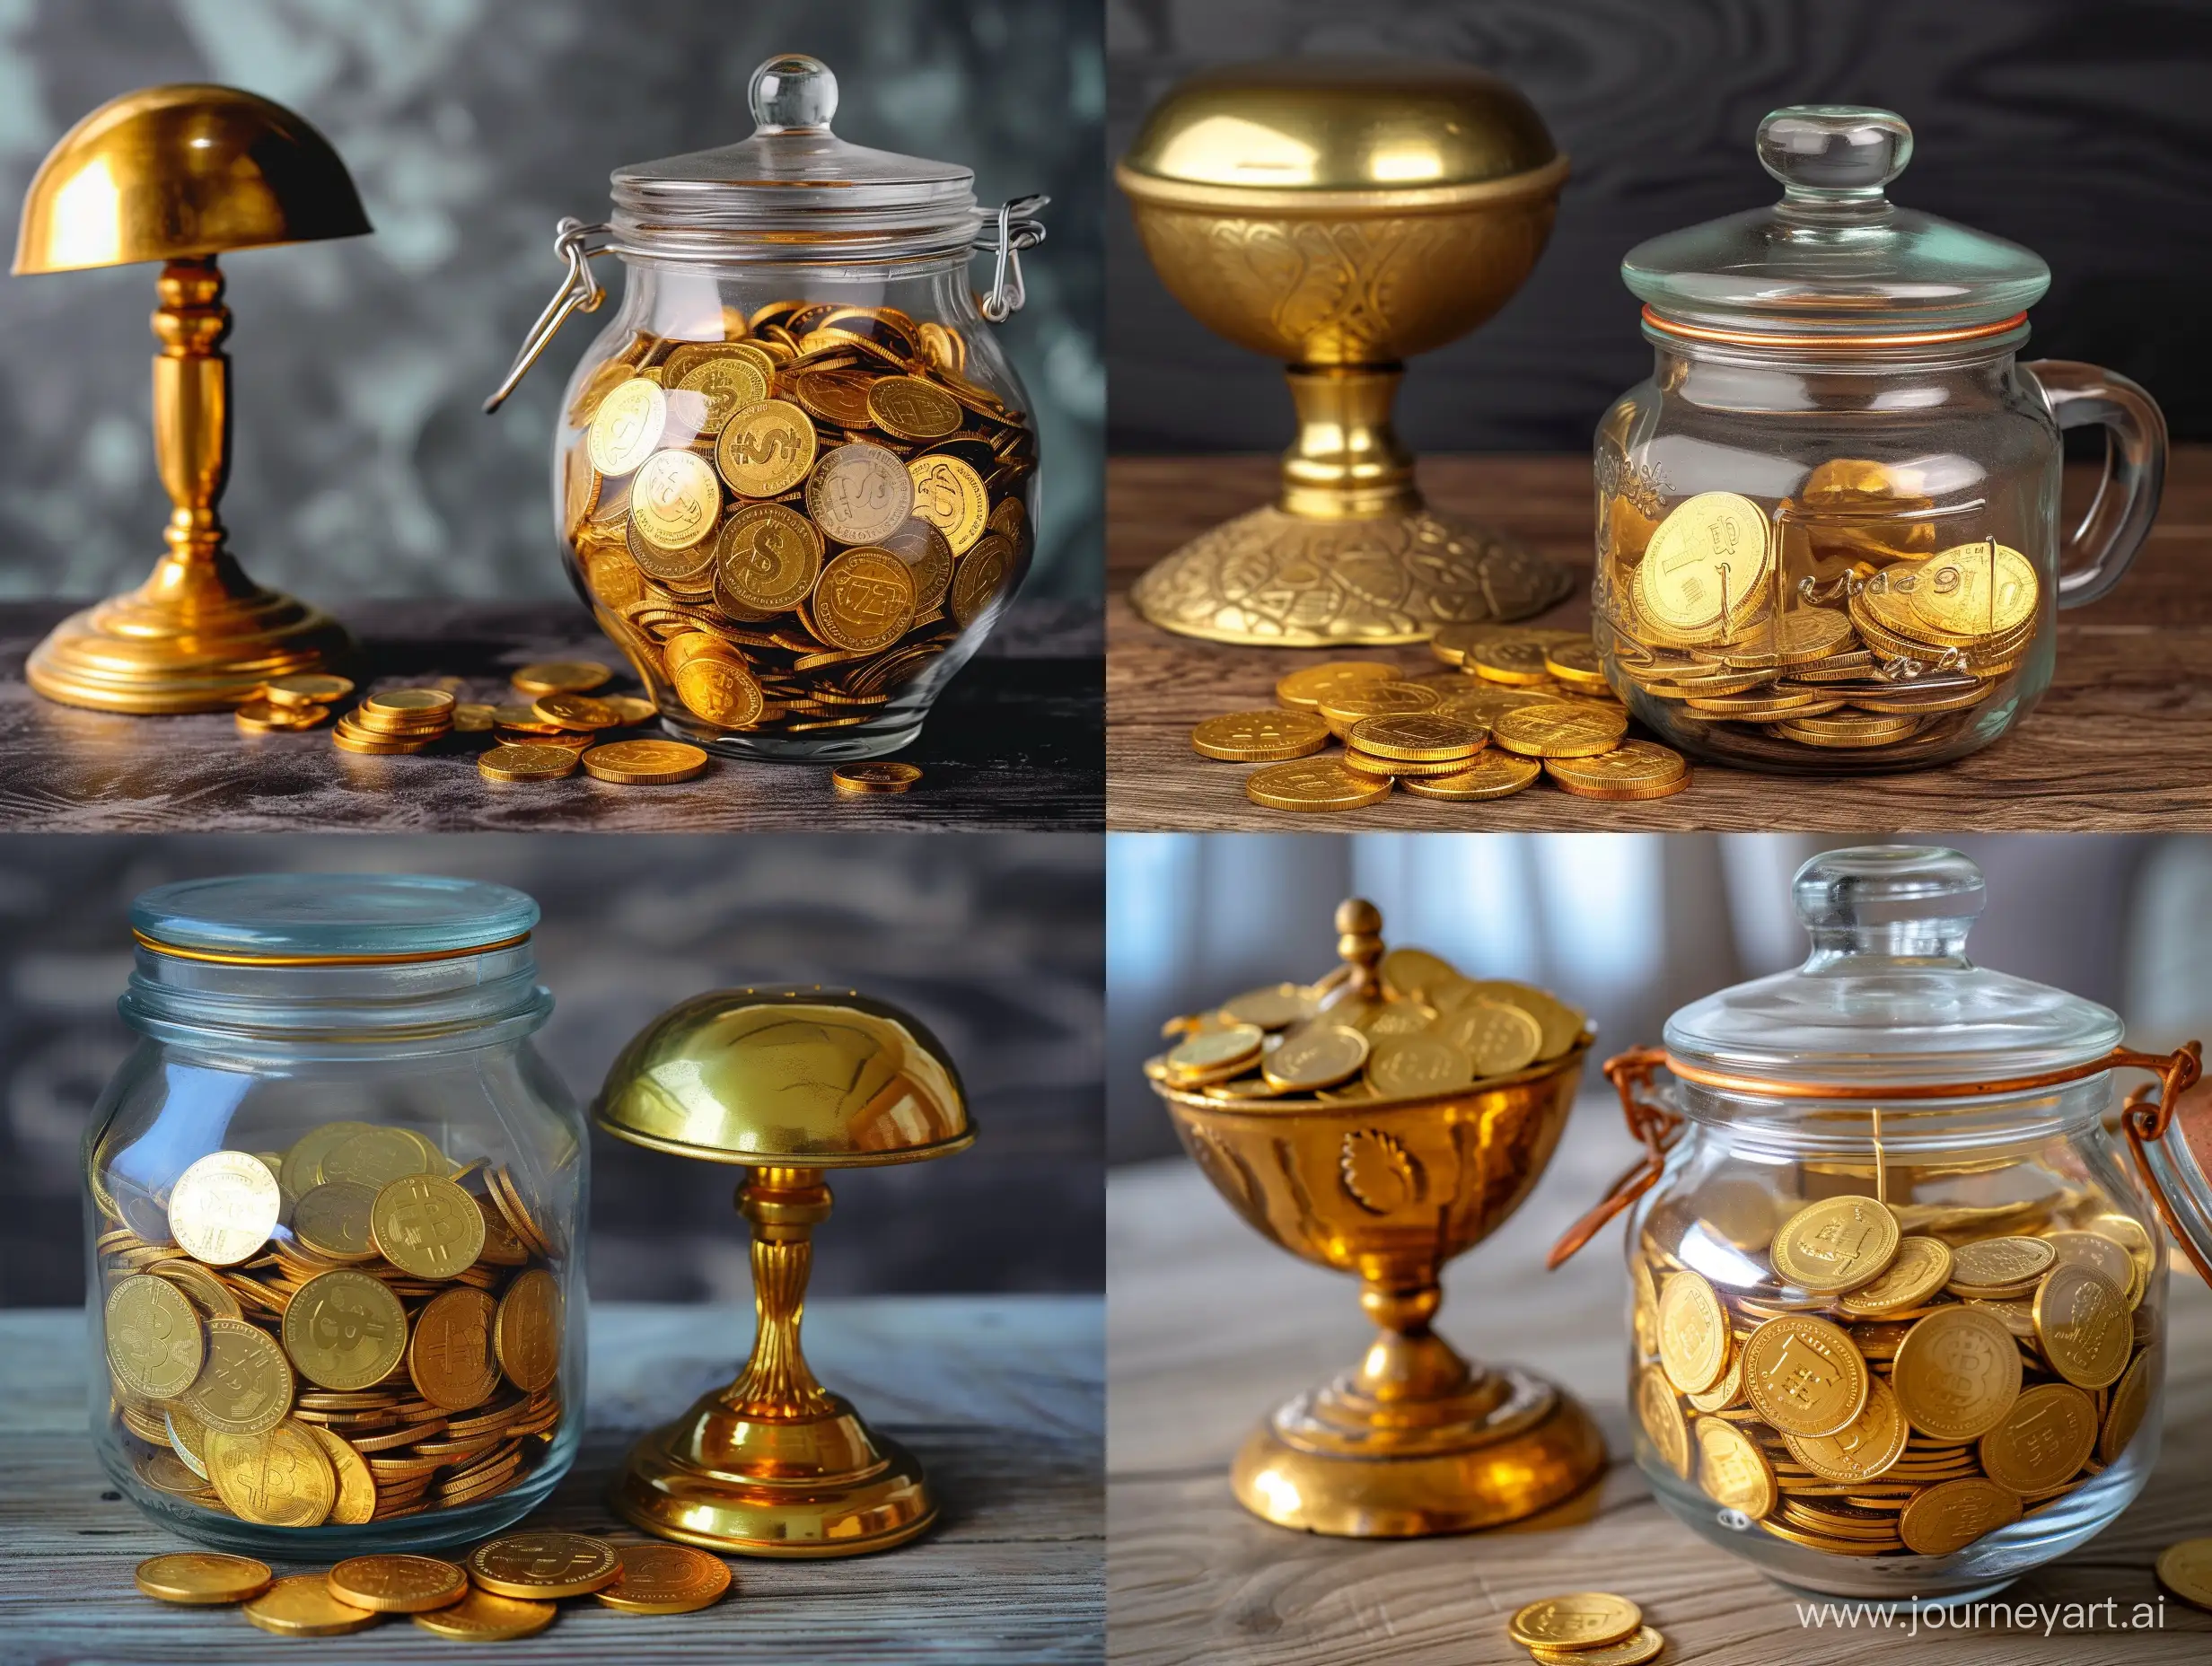 Golden-Coins-in-Glass-Money-Jar-with-Illuminated-Lamp